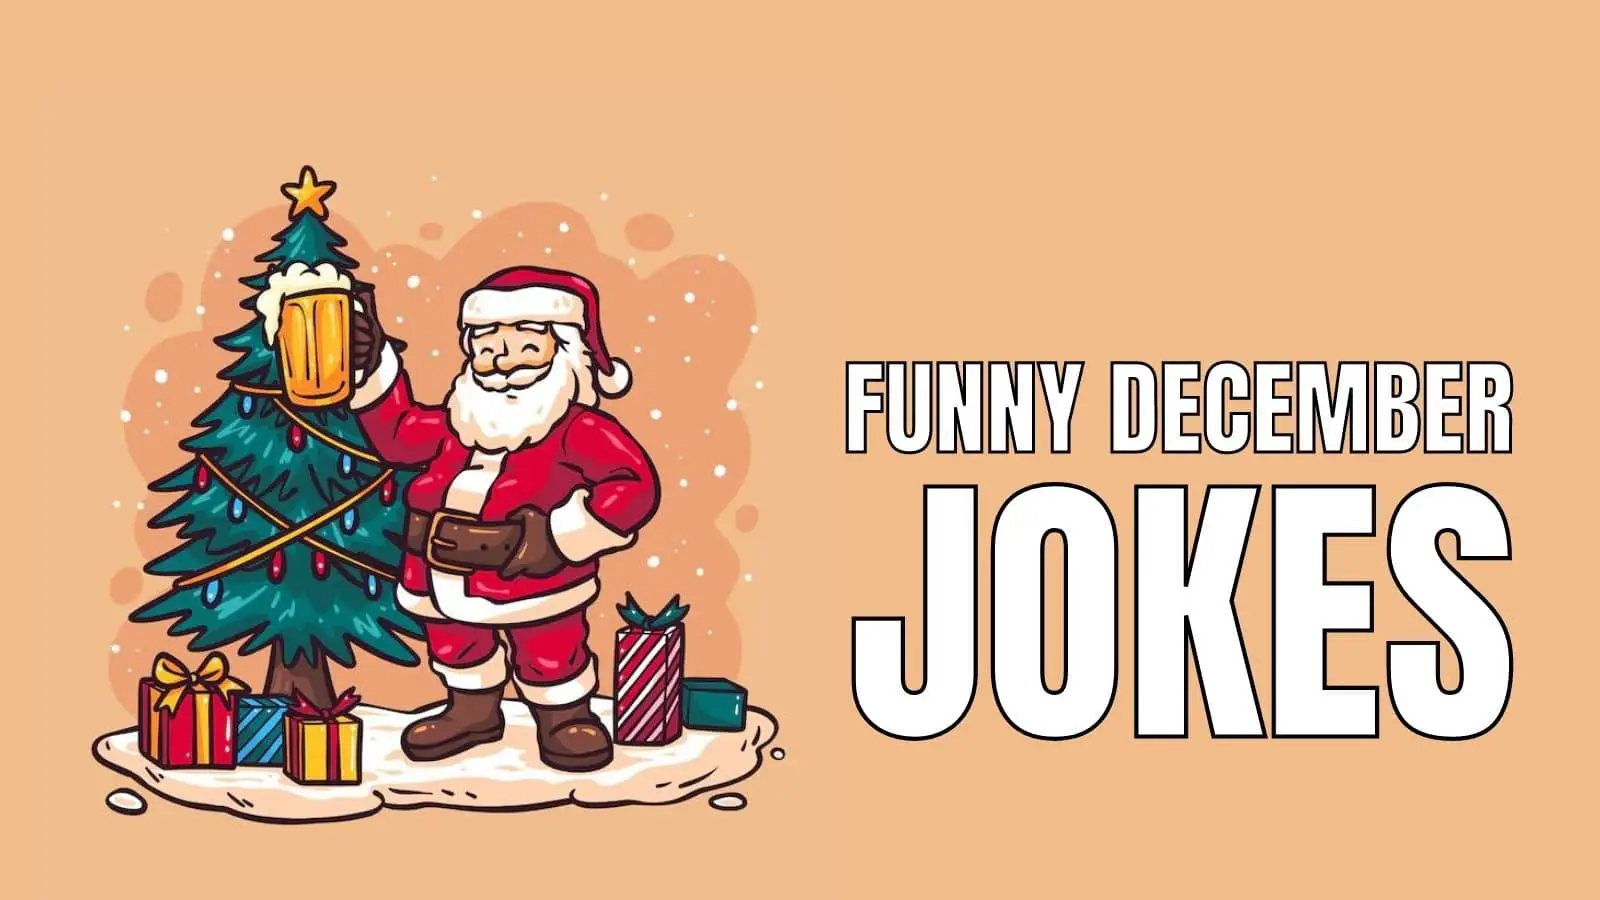 Funny December Jokes and Puns